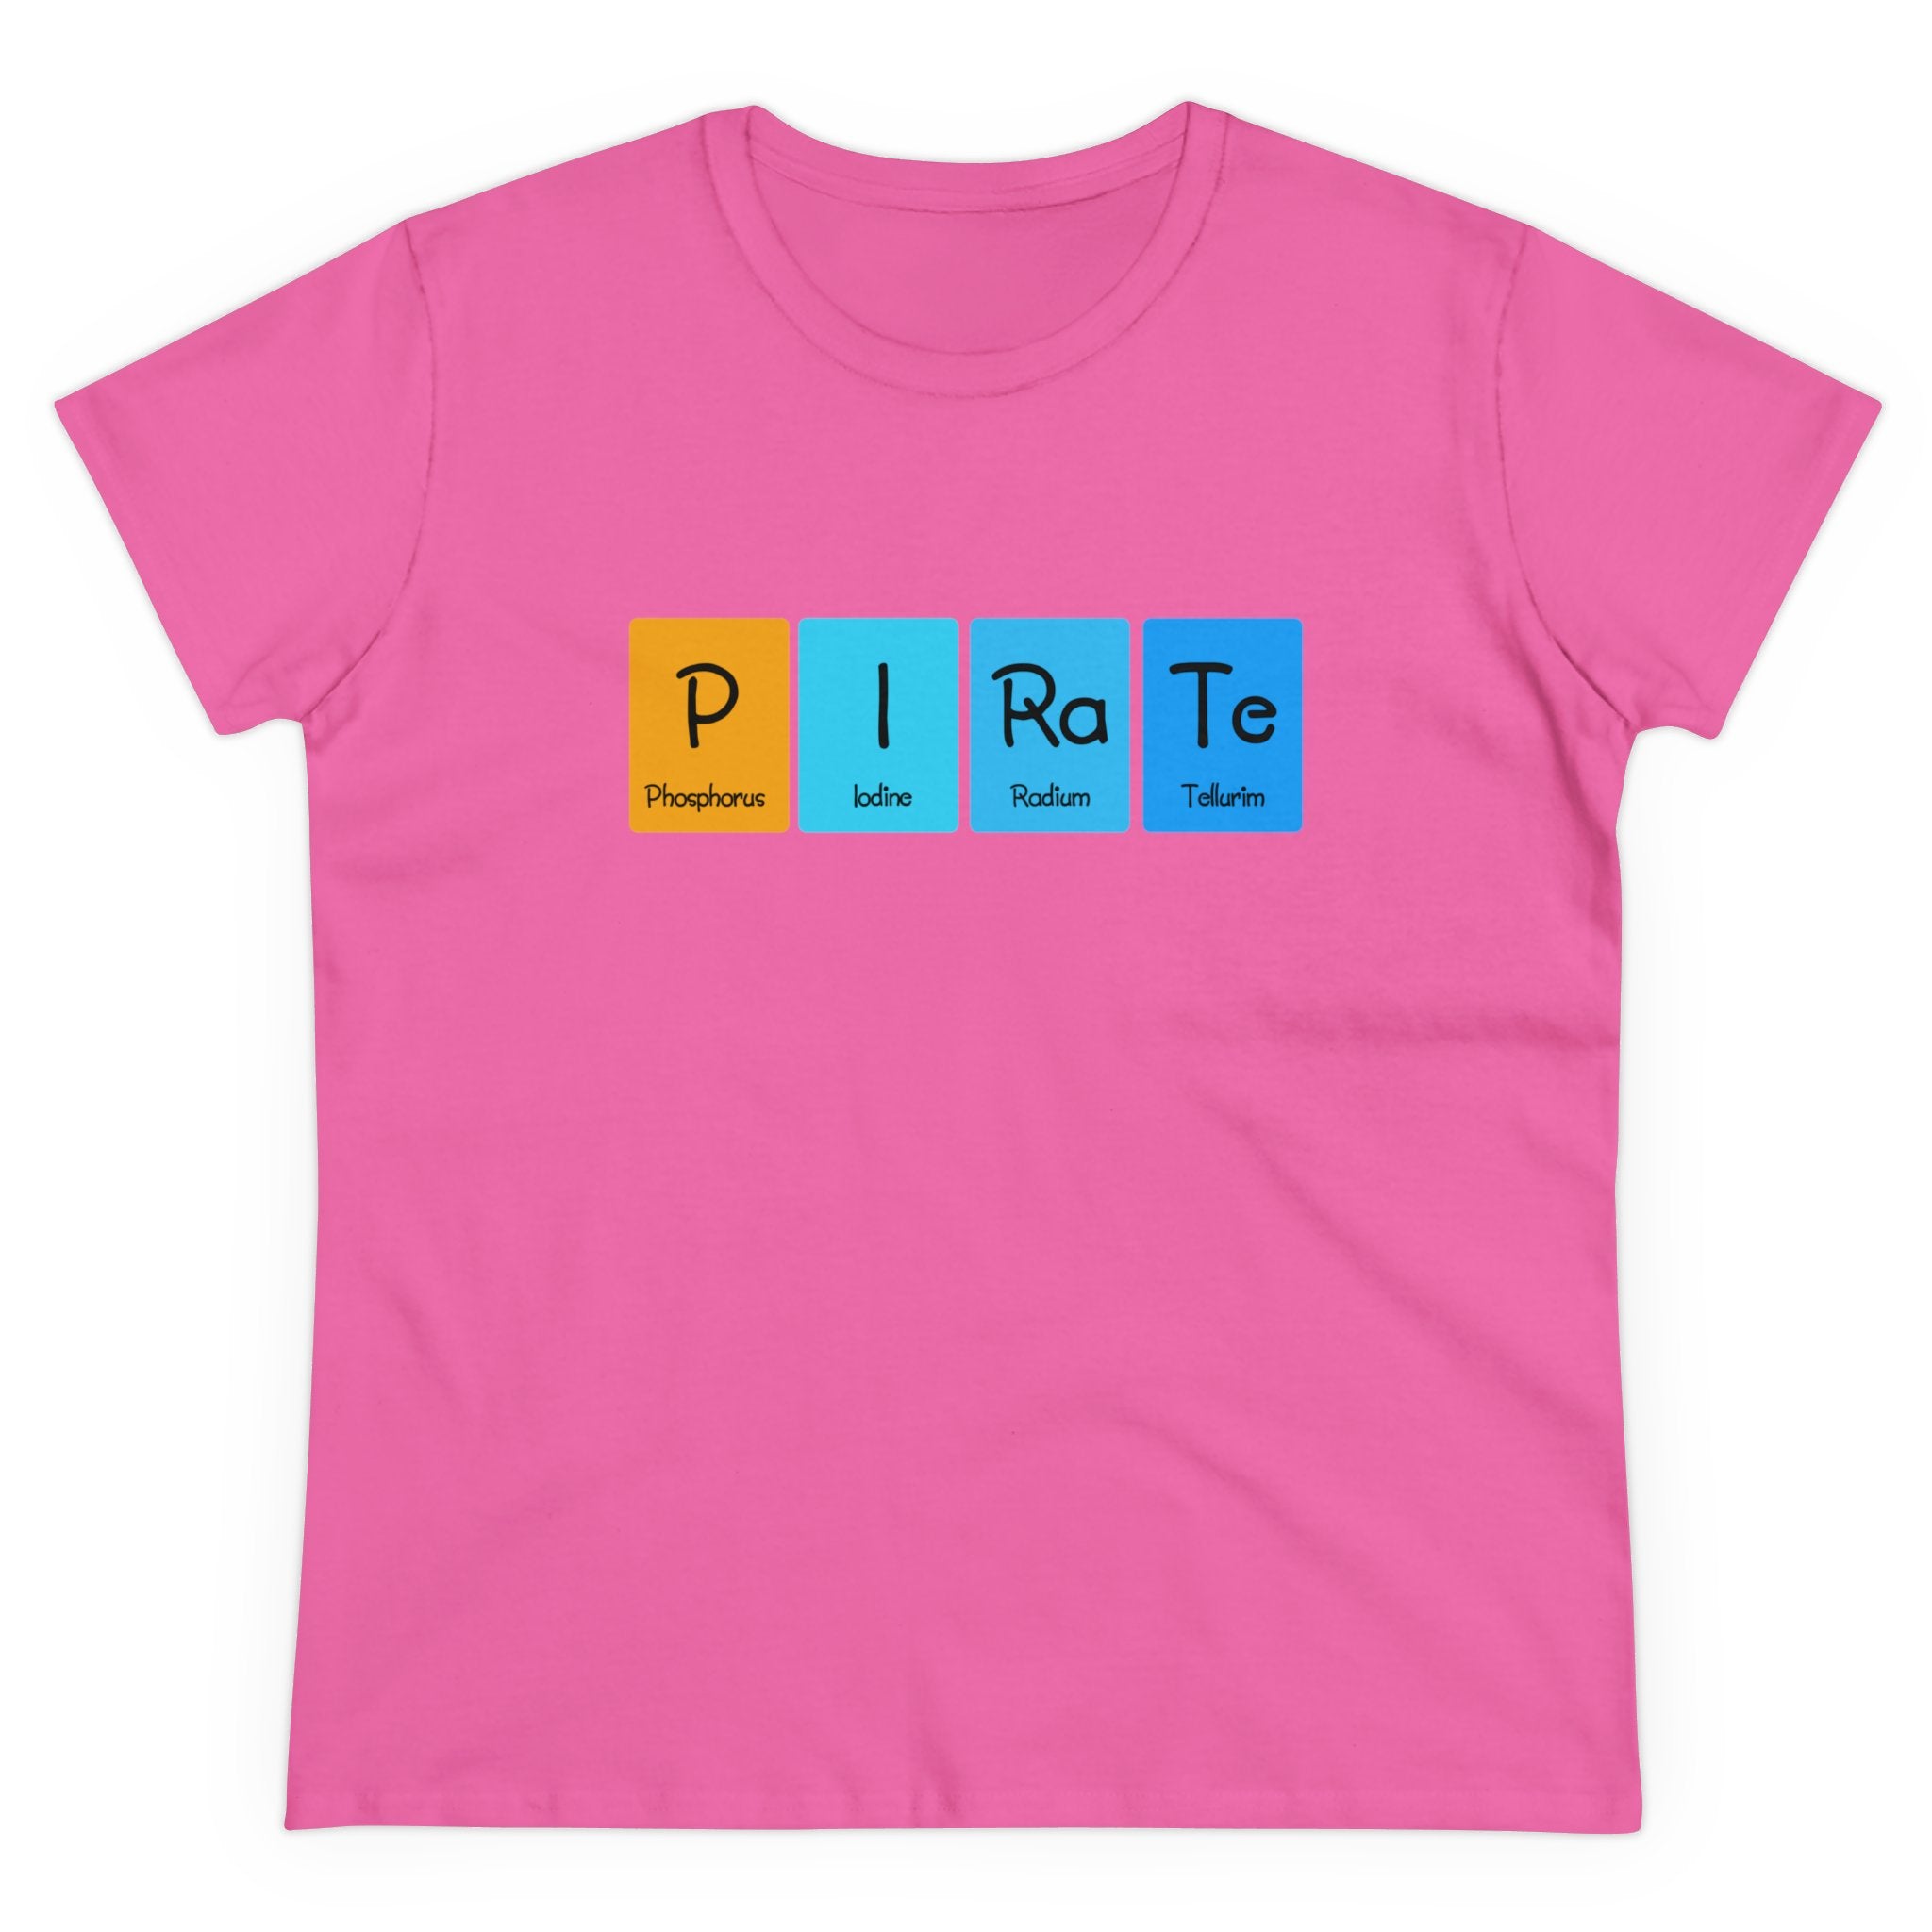 Trendy pink P-I-Ra-Te - Women's Tee crafted from ethically grown cotton, featuring the word "PIRATE" cleverly spelled out using chemical element symbols: Phosphorus (P), Iodine (I), Radium (Ra), and Tellurium (Te).